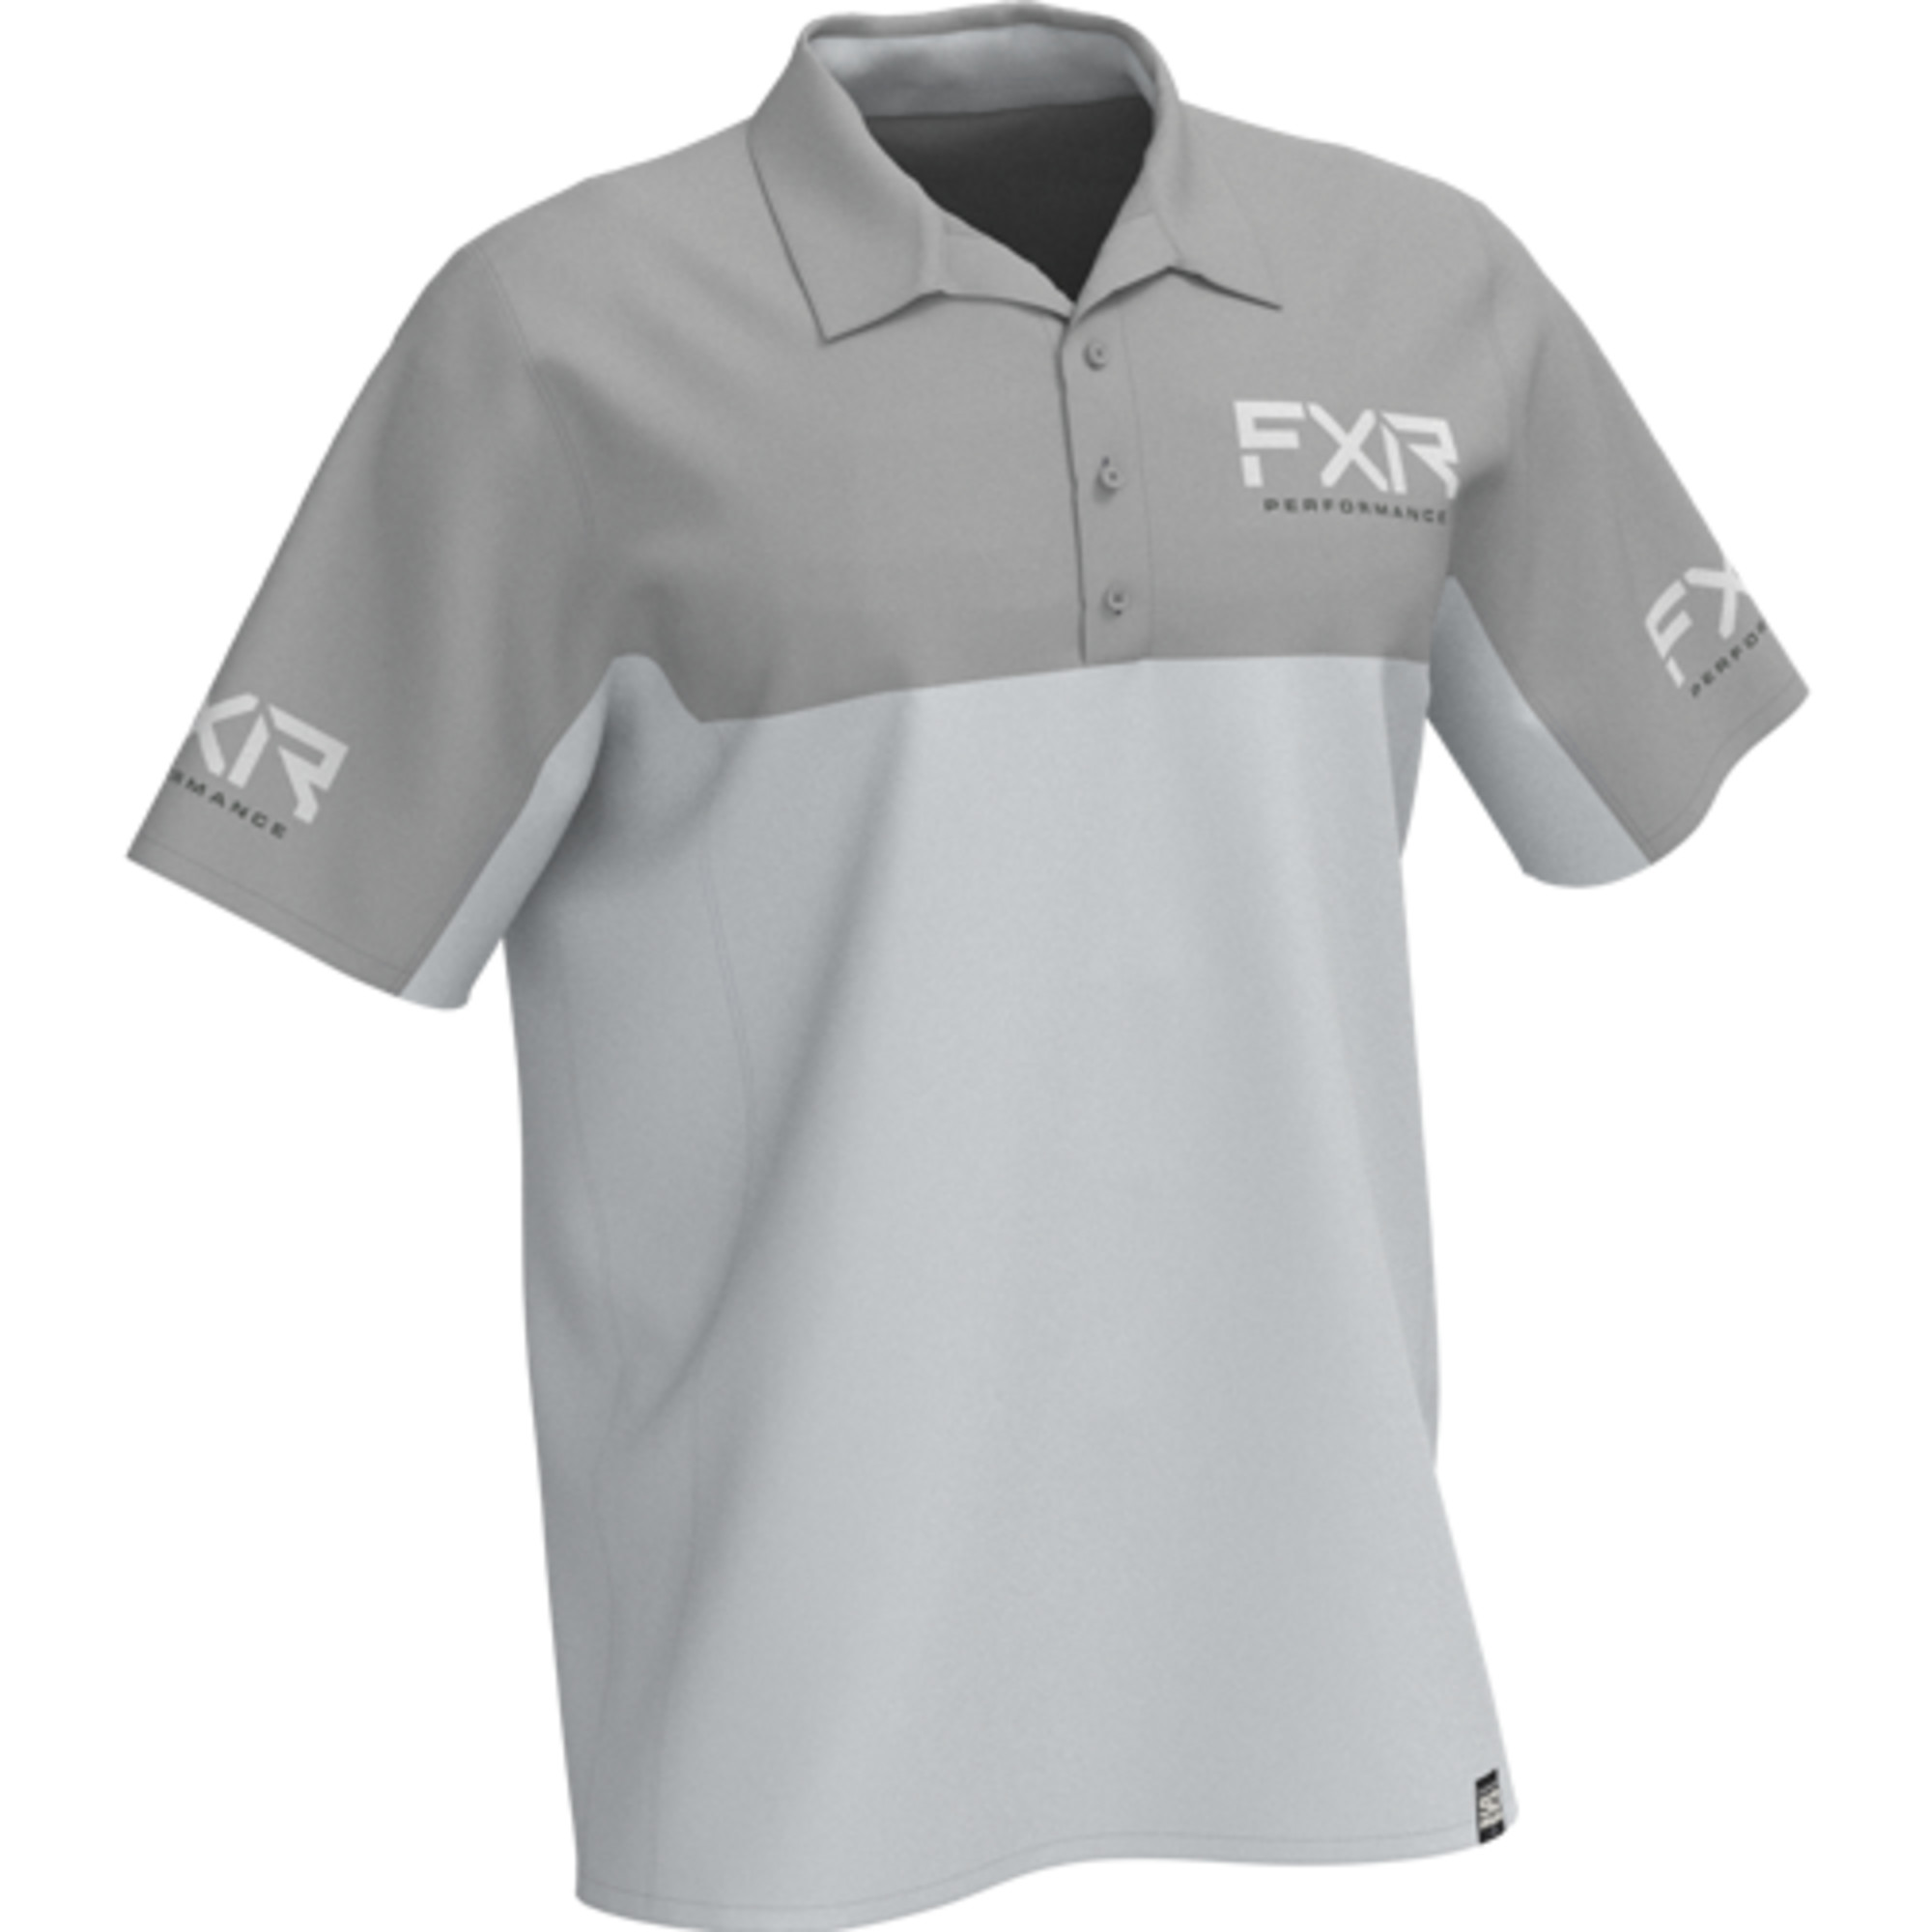 fxr racing shirts for men cast performance upf polo